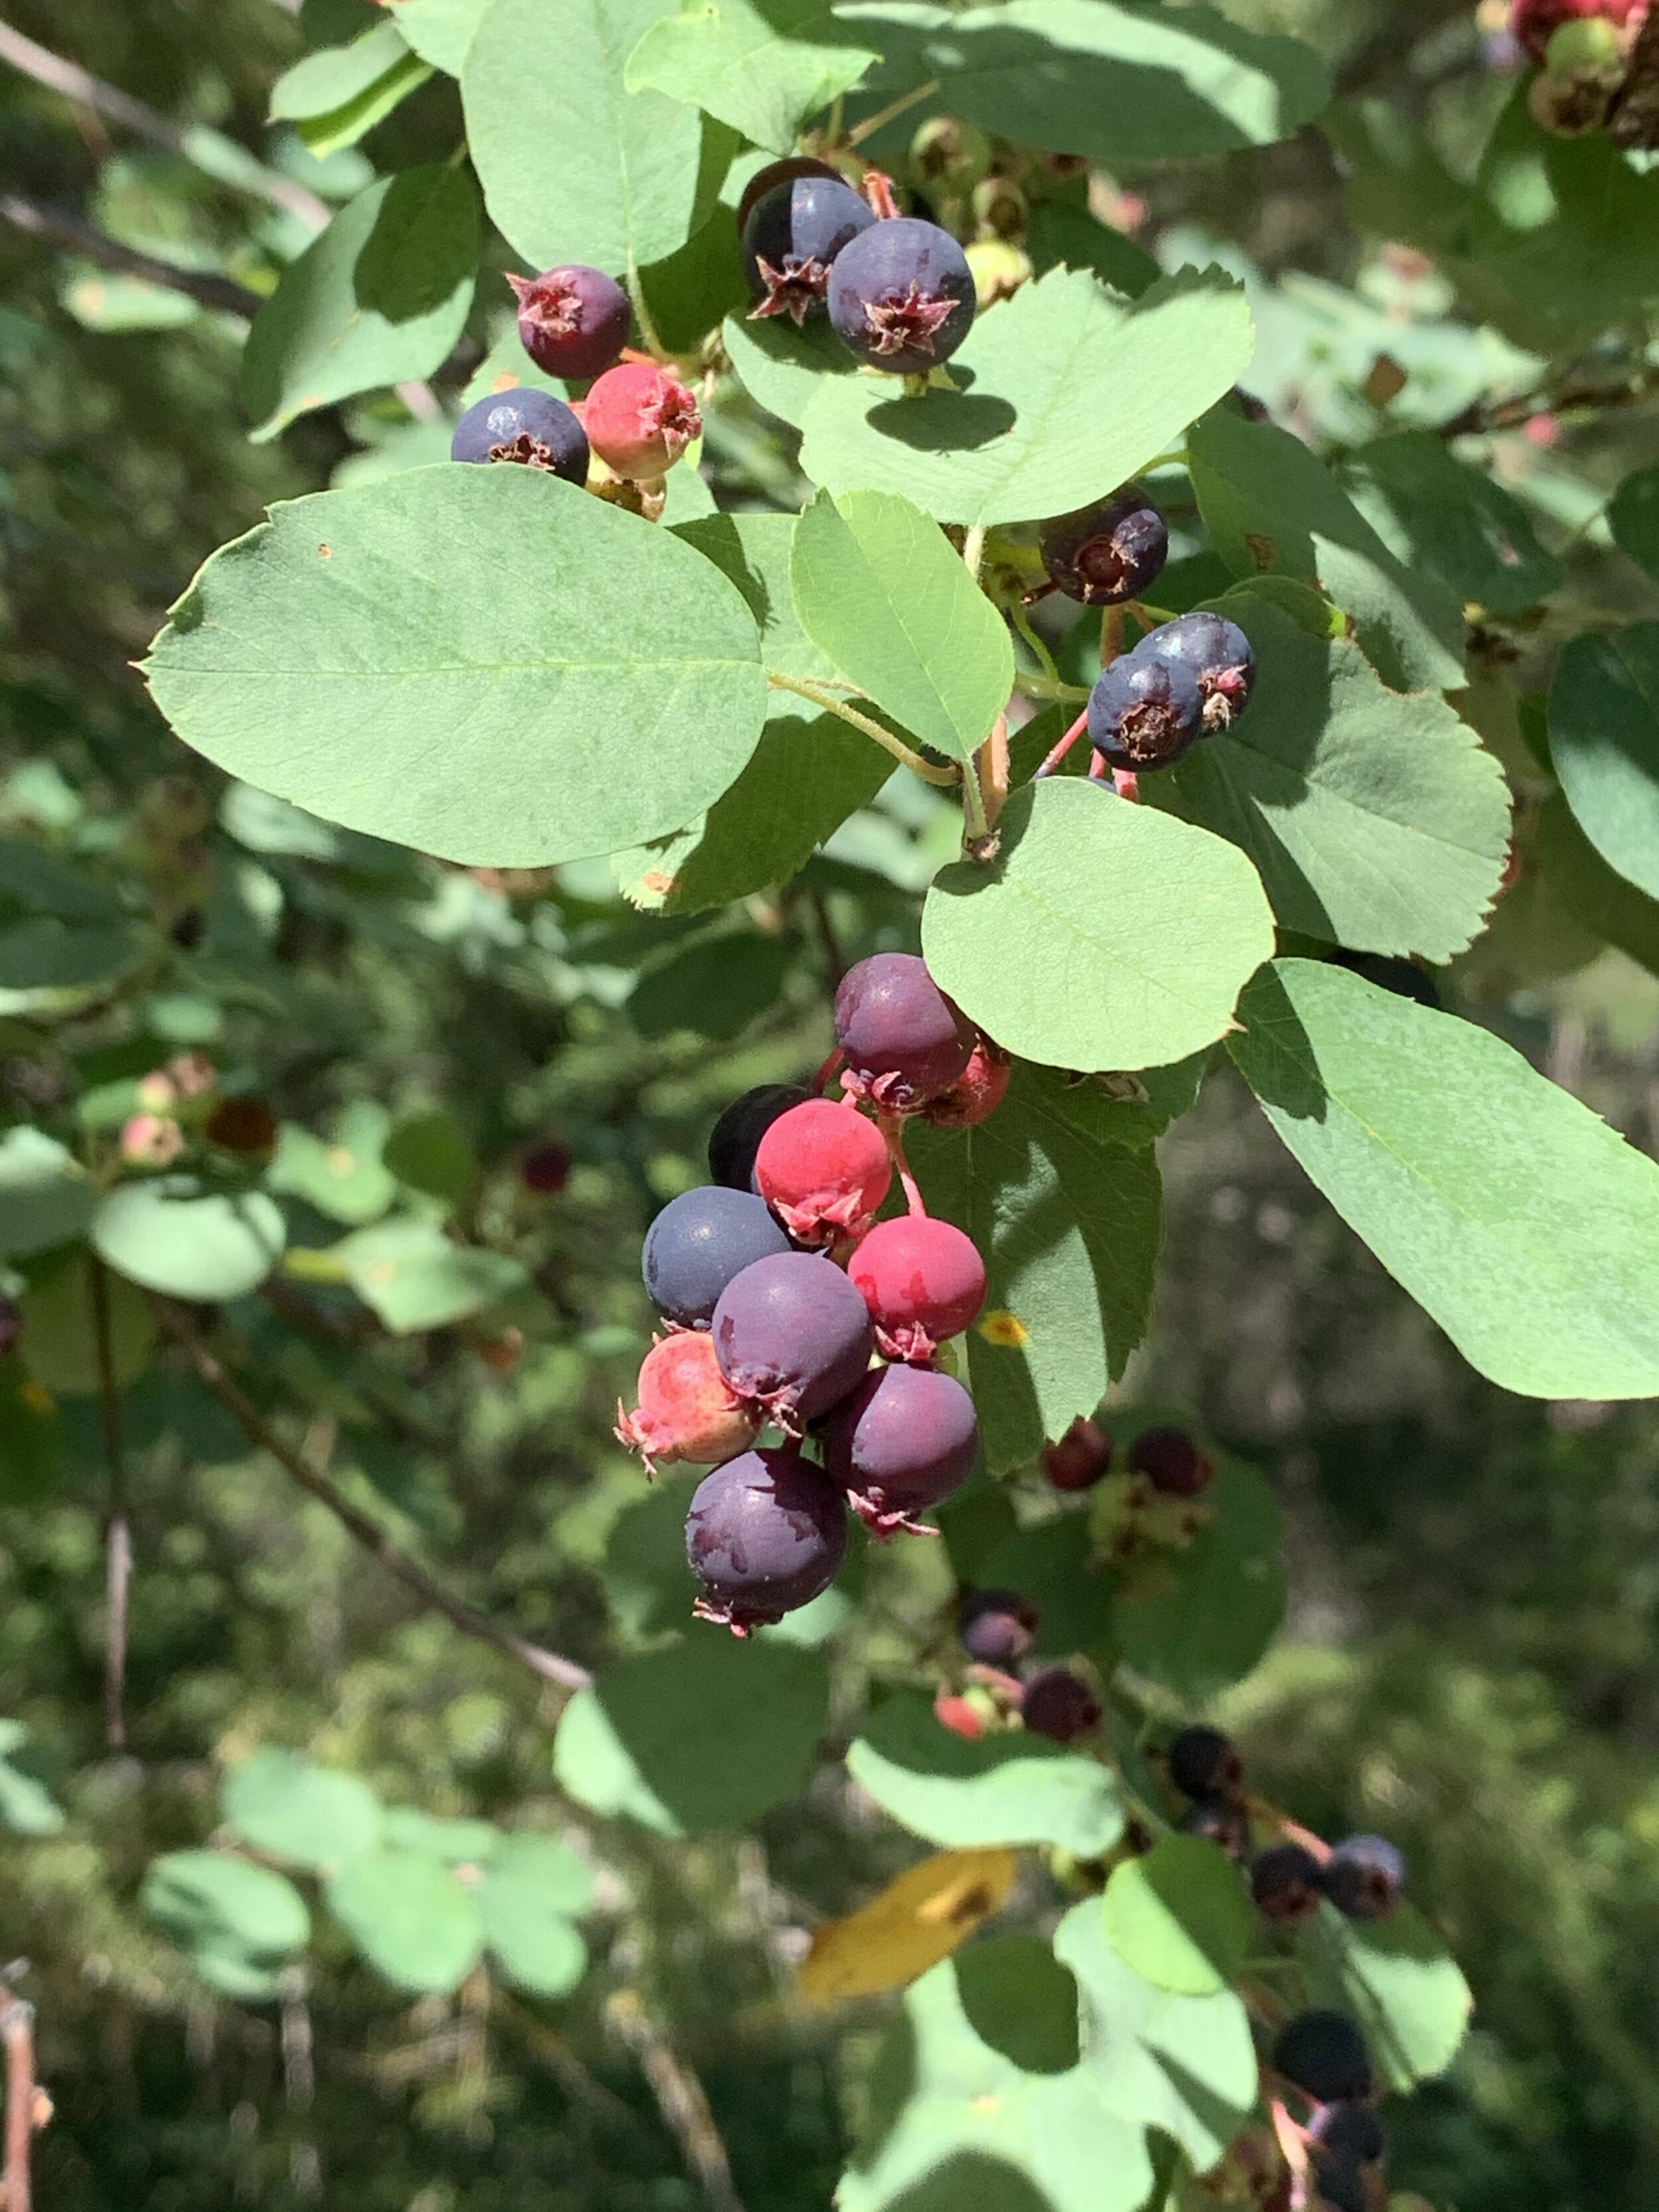  Here are the very popular and abundant huckleberries of Montana.  Did you know bears eat about 30,000 berries a day? When bears go into hibernation, the berries in their stomach ferment and work as a form of sedative.  Who knew all the sleeping bear